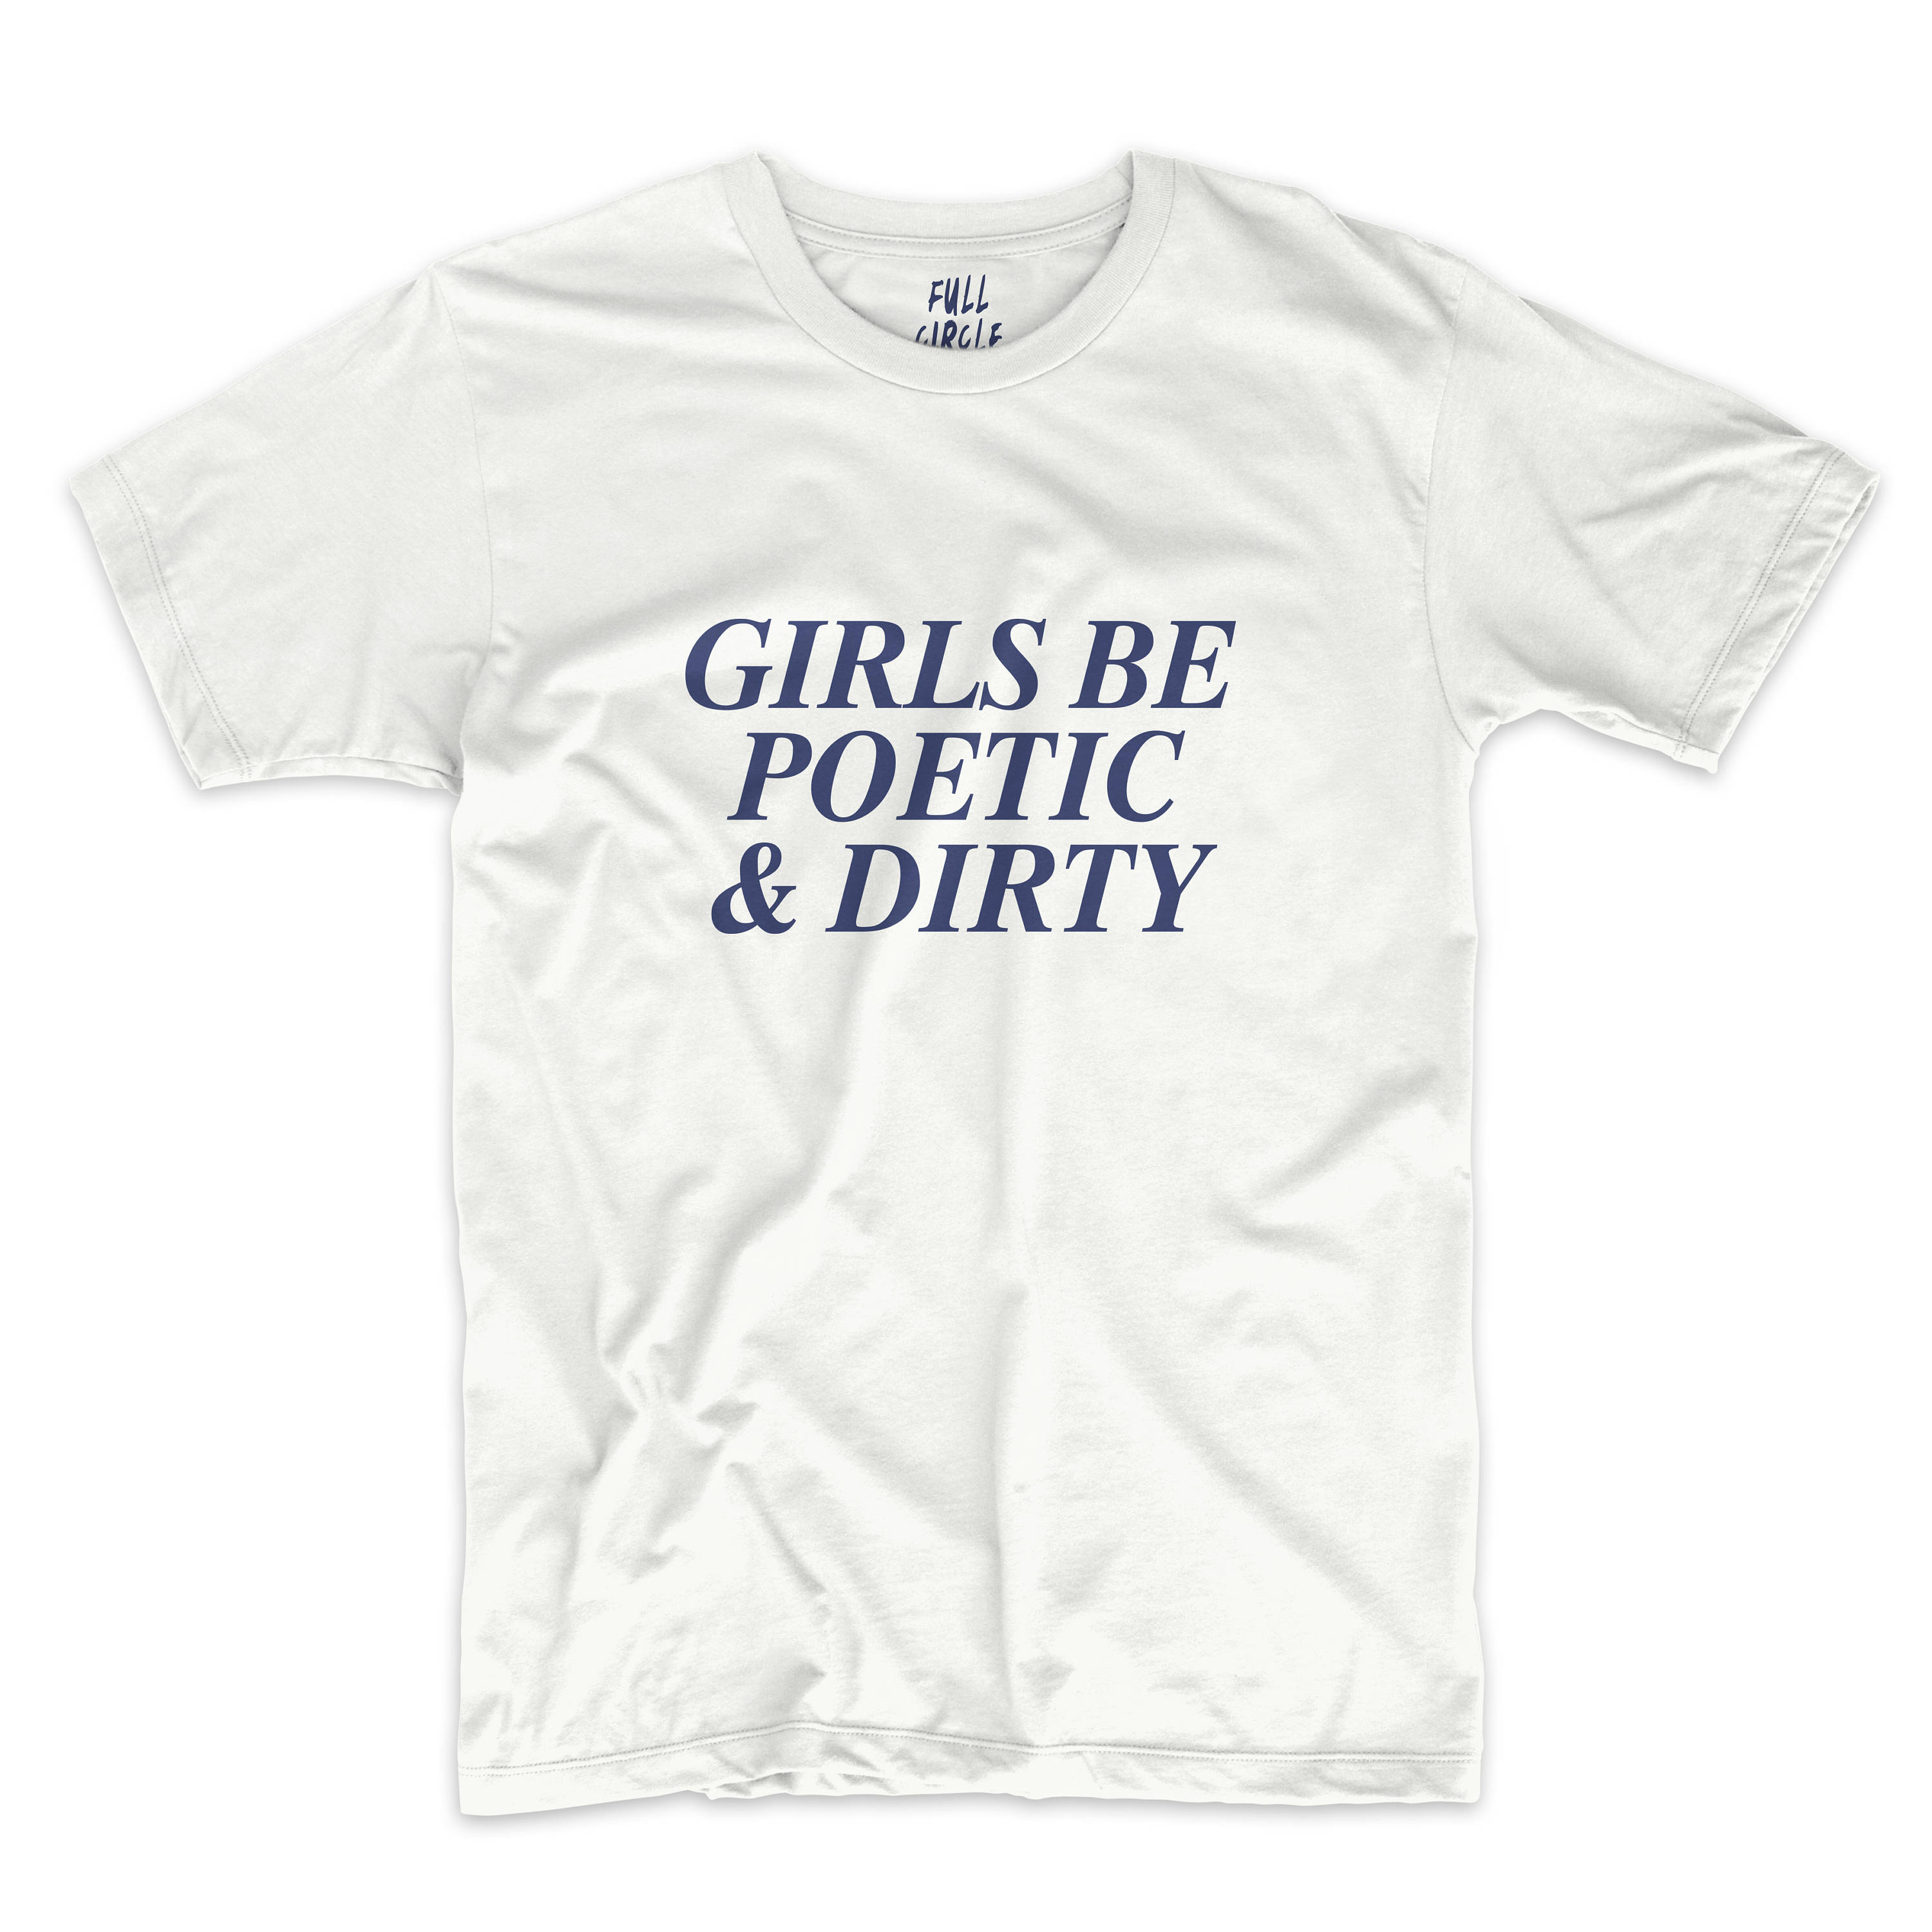 Girls Be Poetic And Dirty T Shirt Vintage Style Graphic Tee